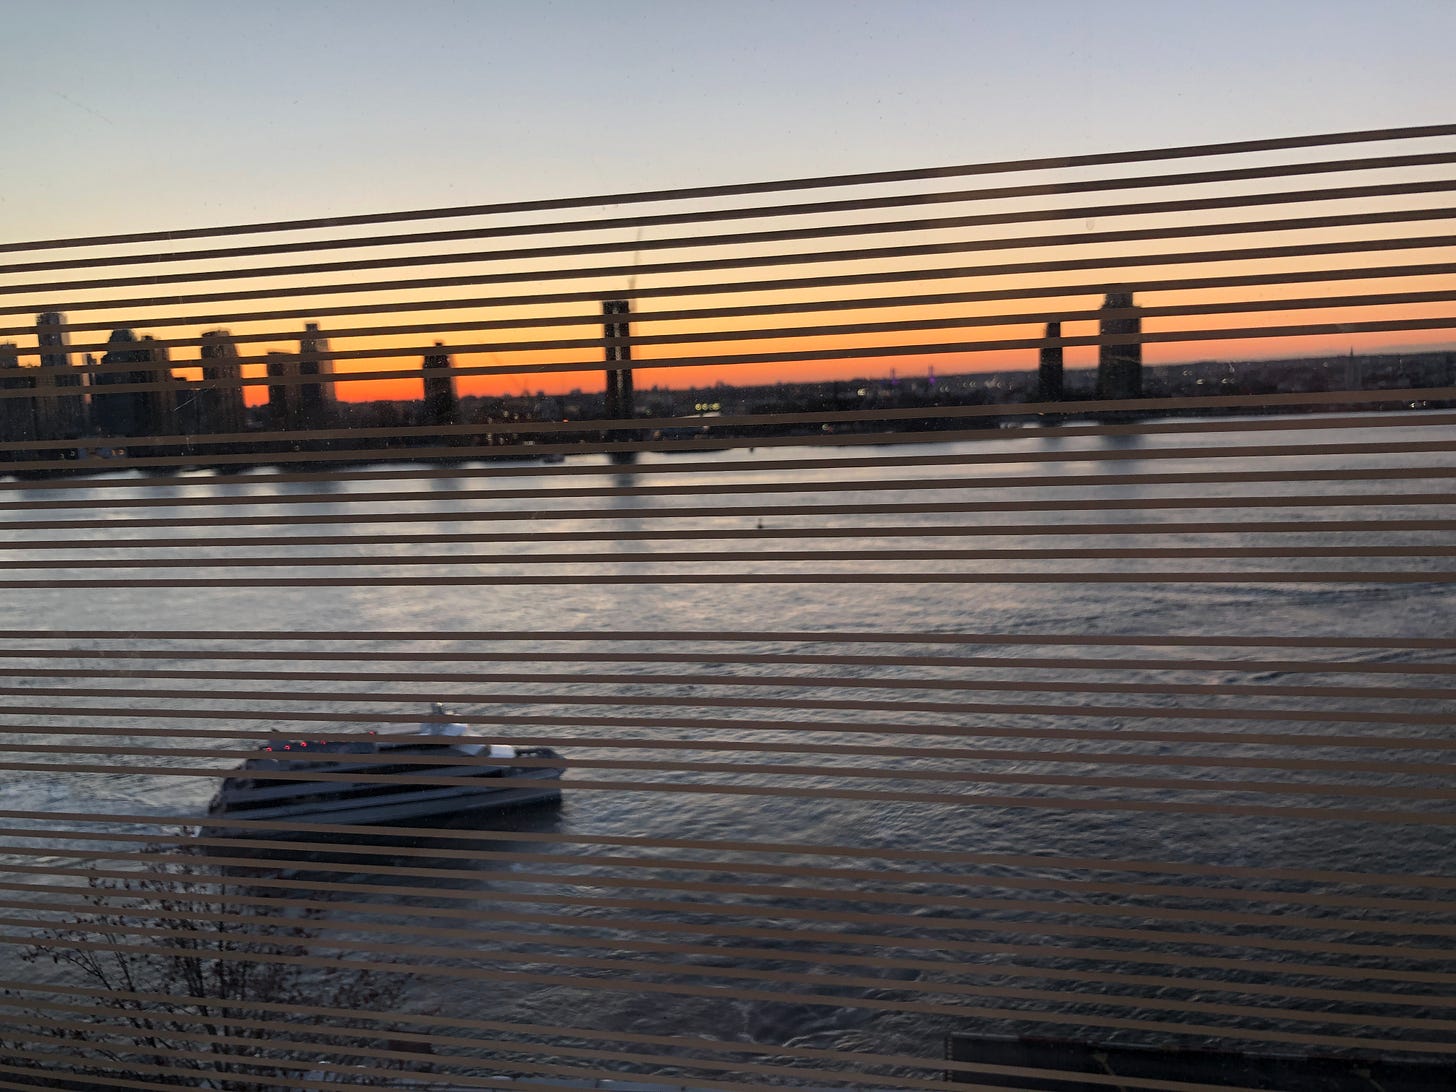 A view through window blinds of the sunrise over the East River.